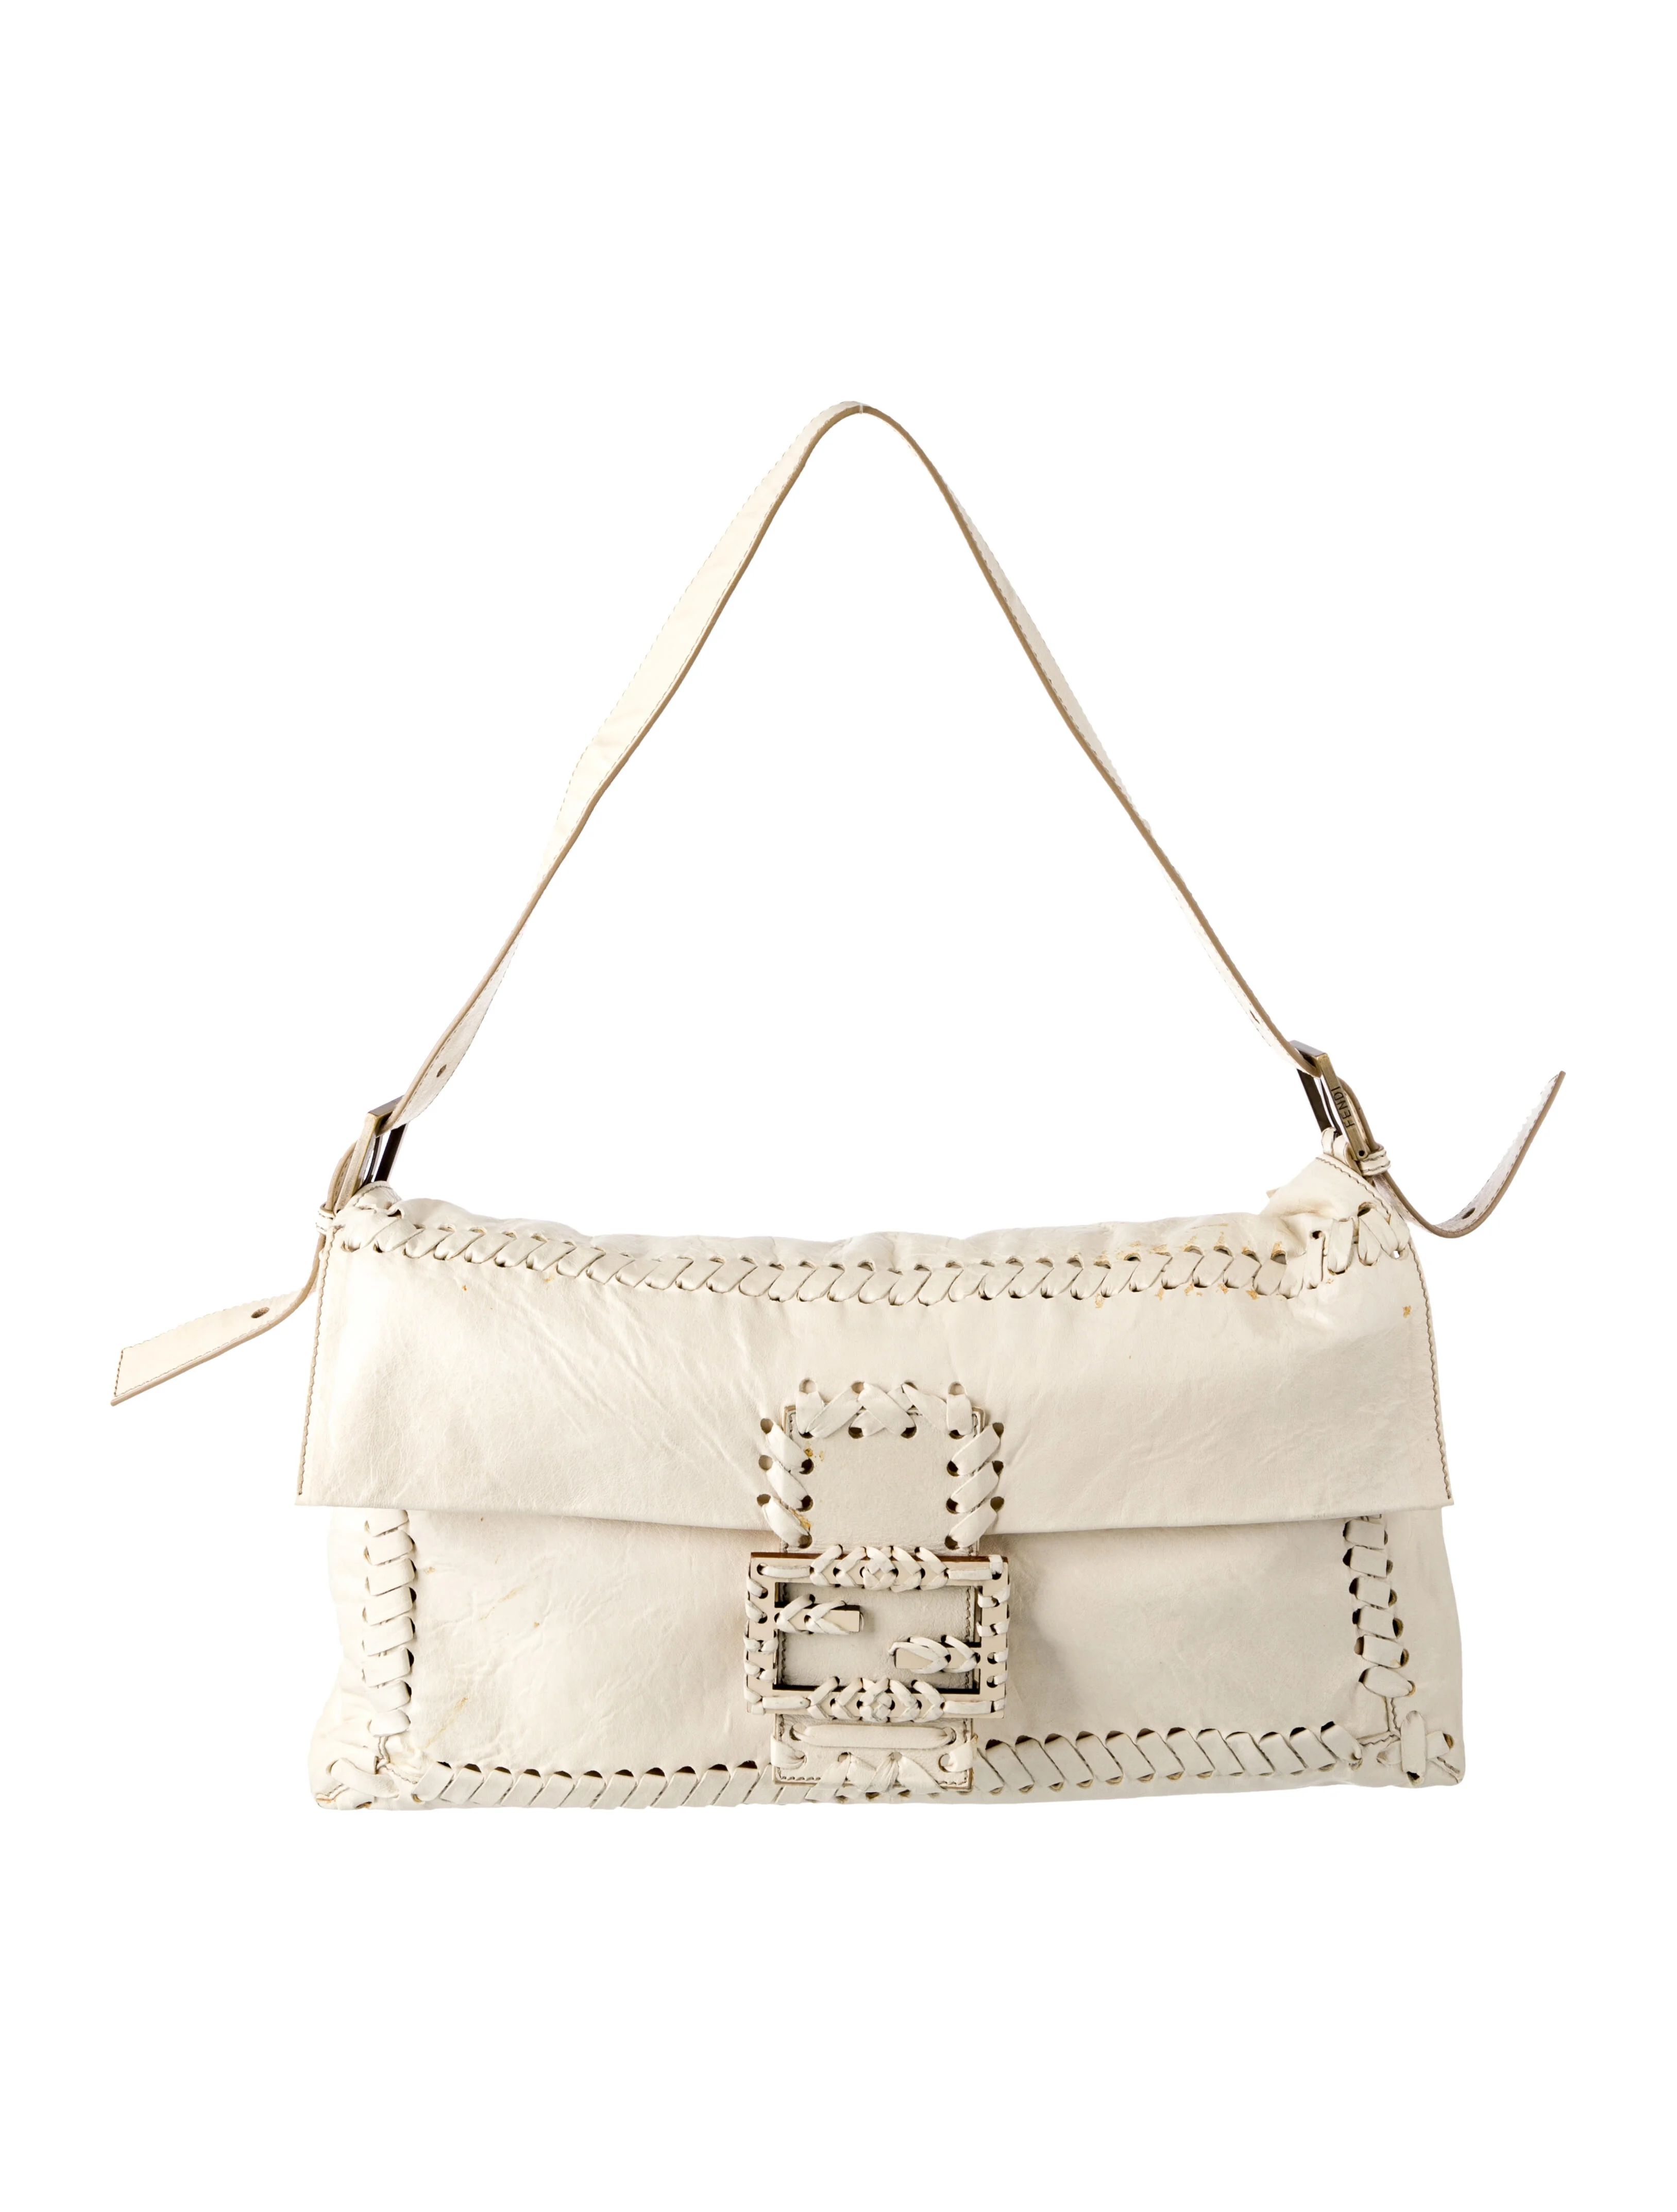 Soft Leather Giant Baguette Whipstitch Shoulder Bag | The RealReal